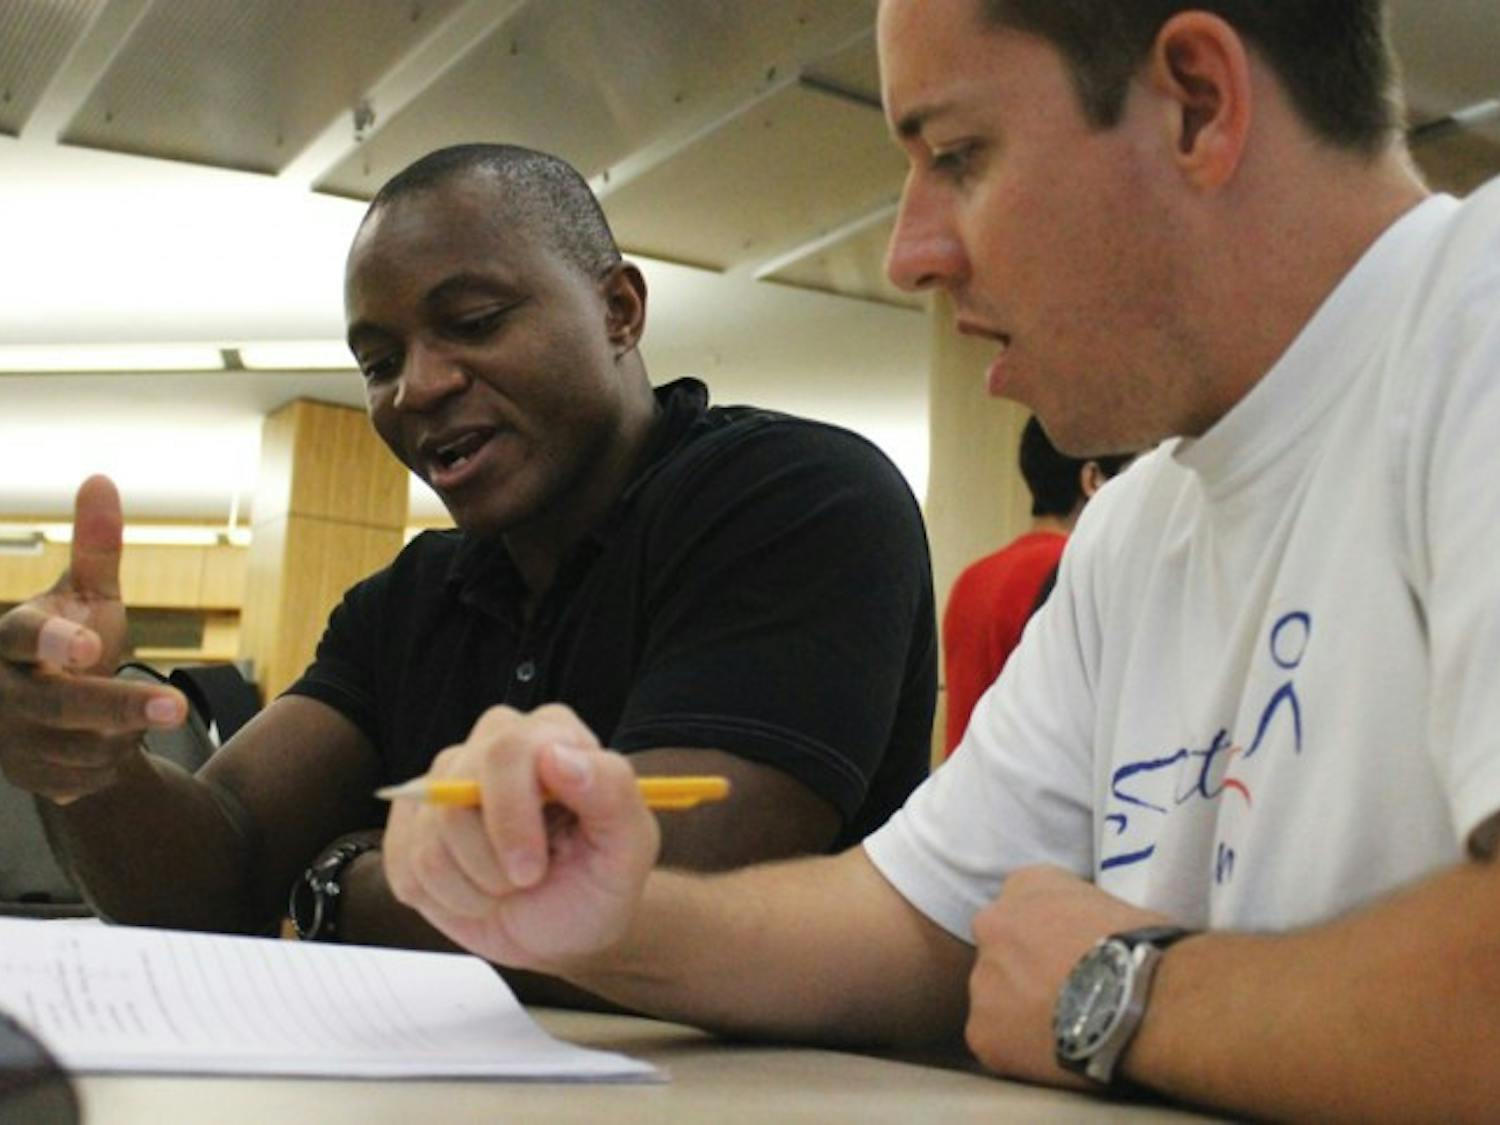 Dave Pittman, right, 35, is tutored by Tshi Tshi Kalala, 38, in Swahili. Pittman is a second-year sustainable development practice graduate student, and Tshi Tshi Kalala is a tutor for the University Athletic Association.